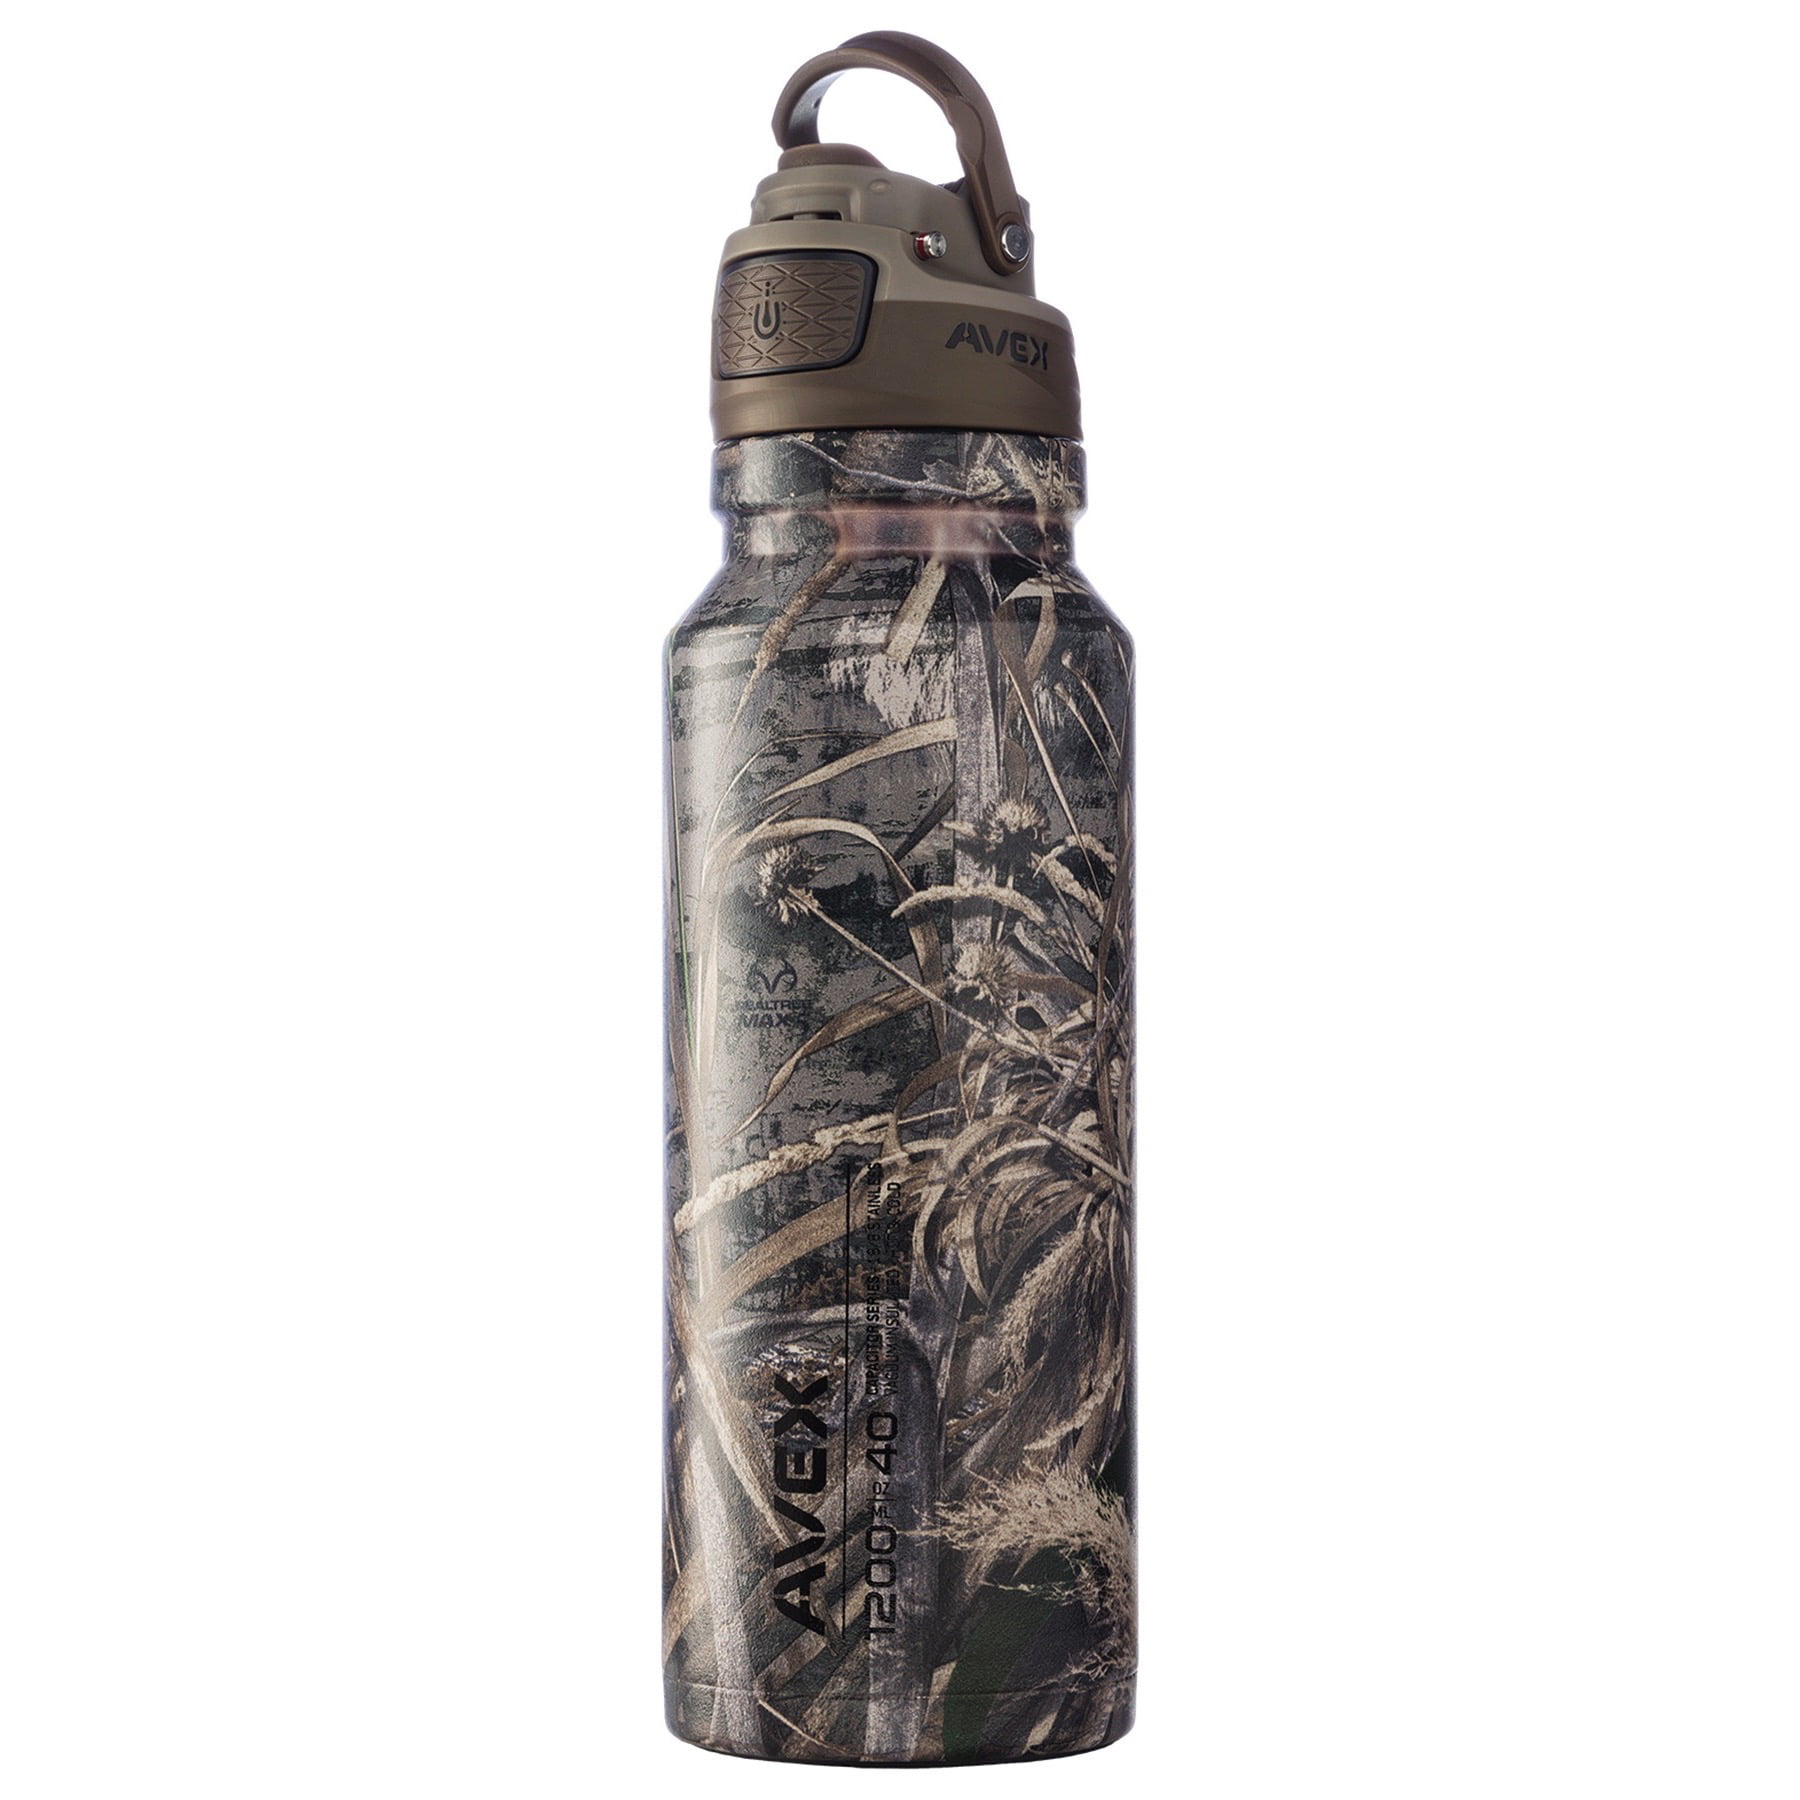 Aoibox 40 oz. Camo Cool Stainless Steel Insulated Water Bottle (Set of 1)